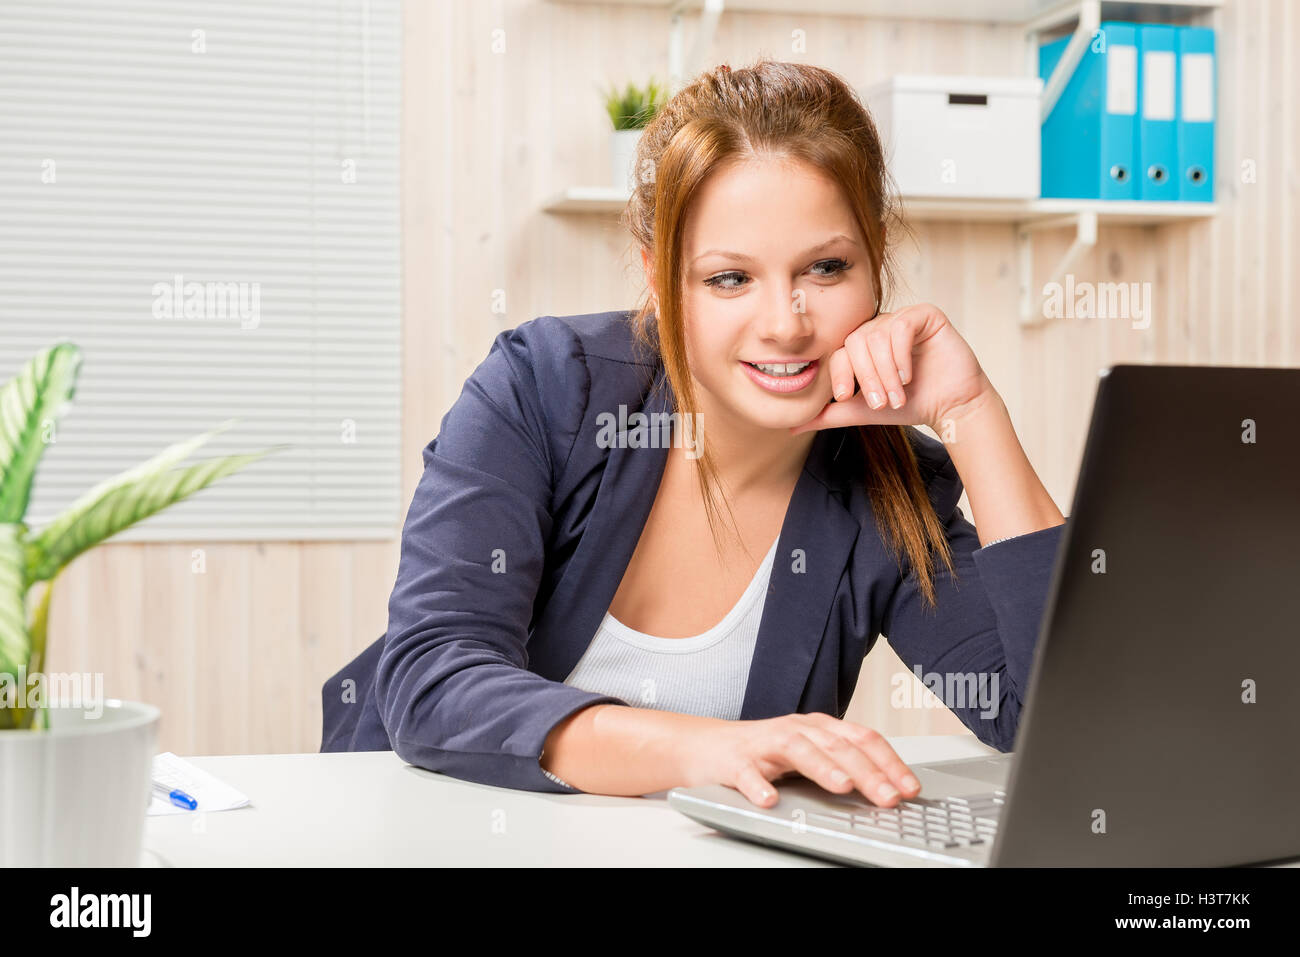 girl in the office in a good mood works on a computer Stock Photo